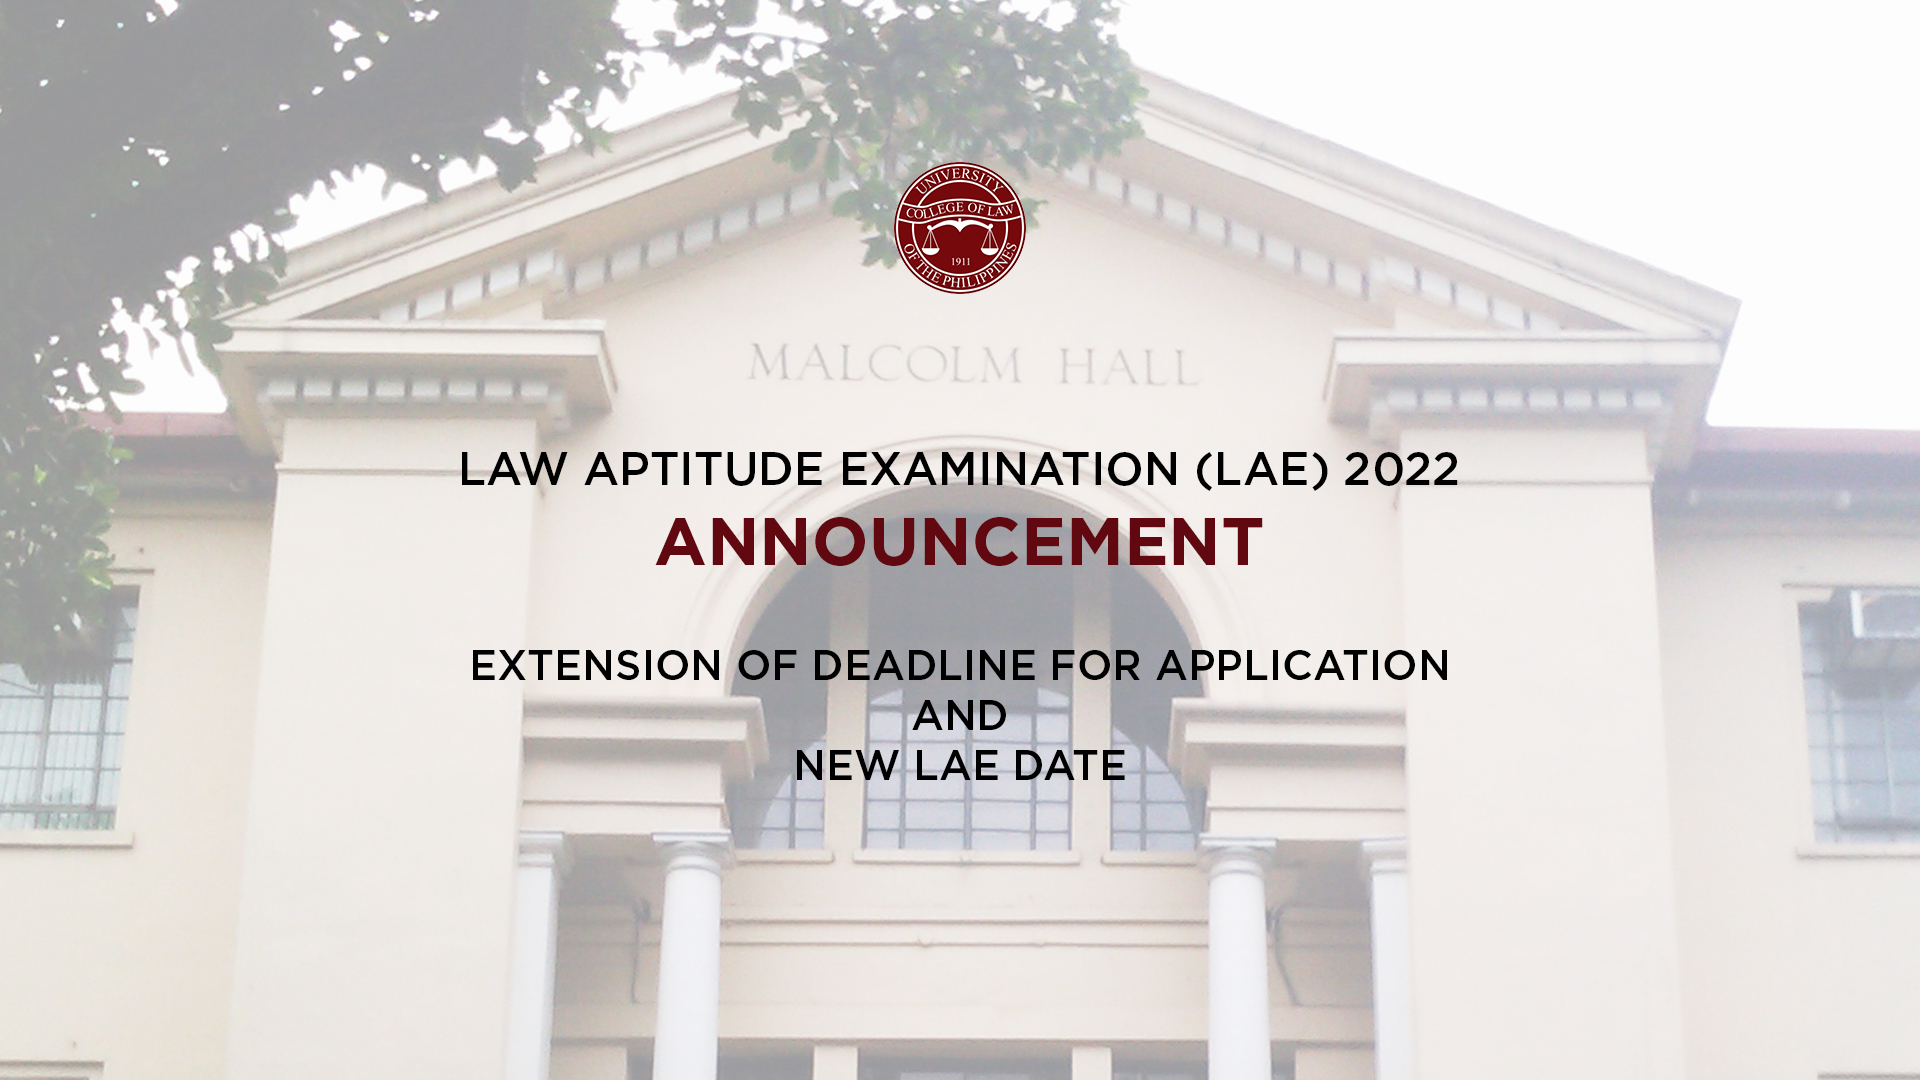 Extension of Deadline for Application and New LAE Date